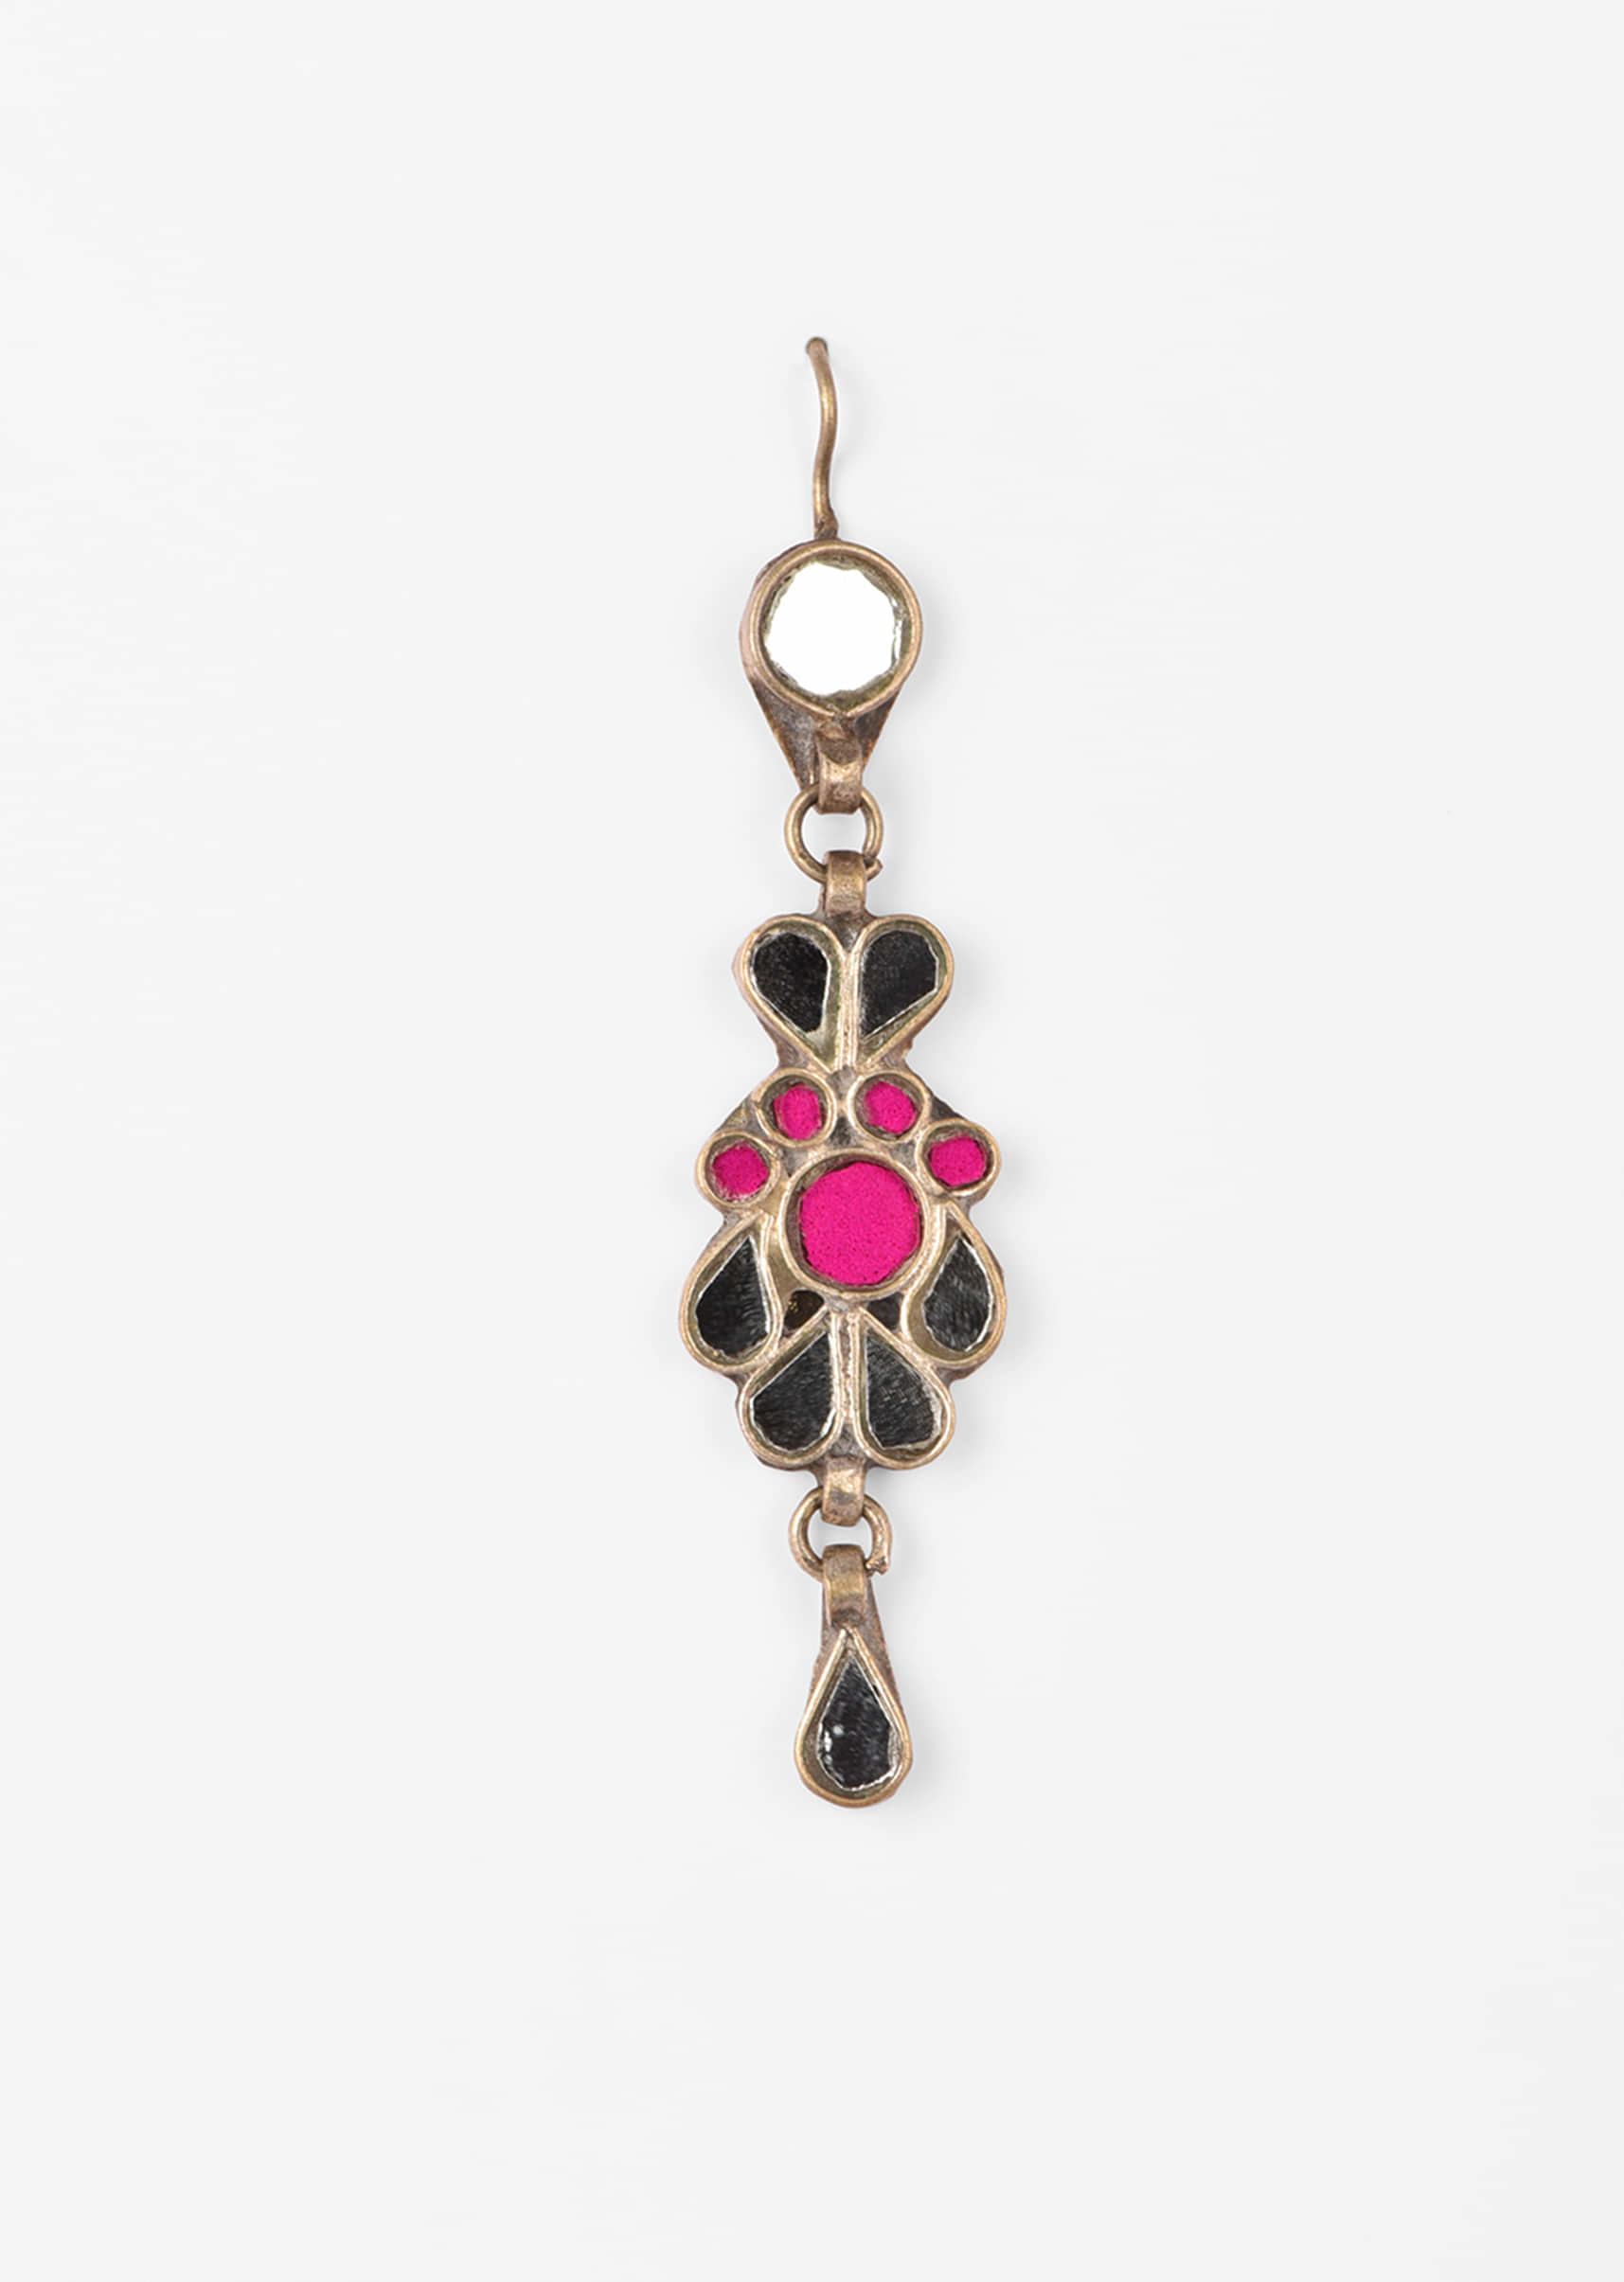 Silver Earrings With Mirror and Pink Glass Work In An Ethnic Motif 